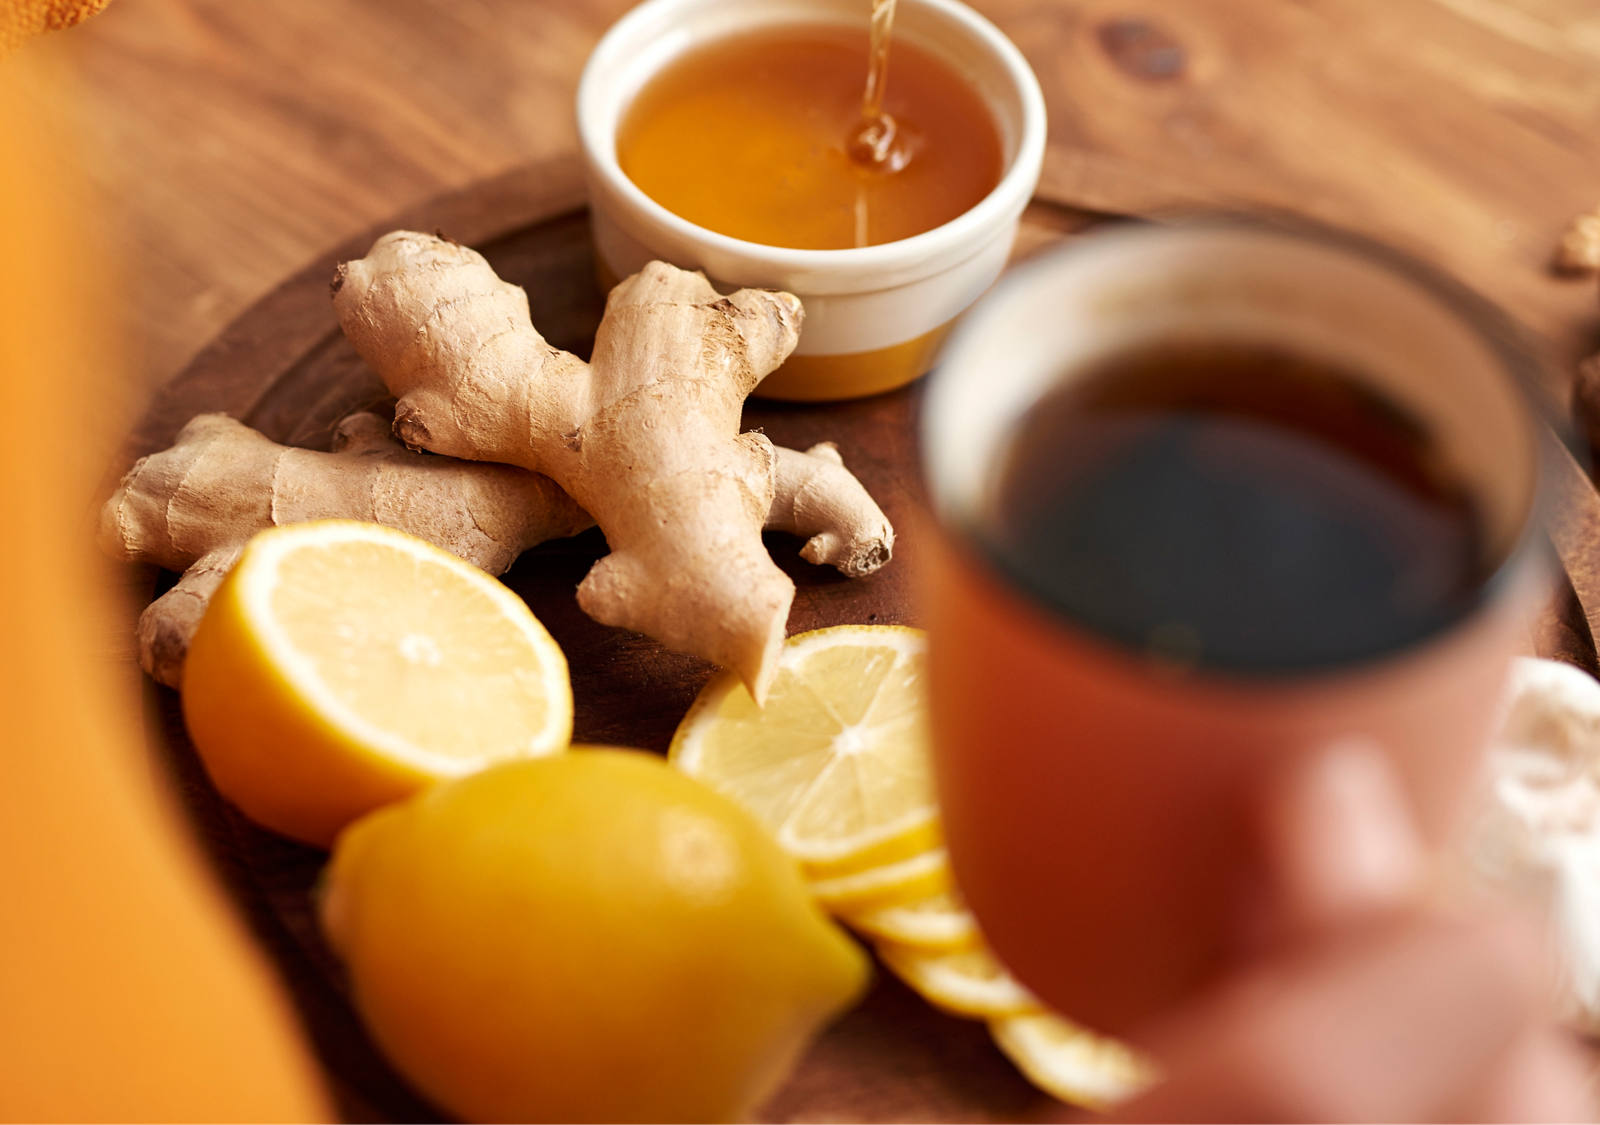 A dry cough: the best household remedies